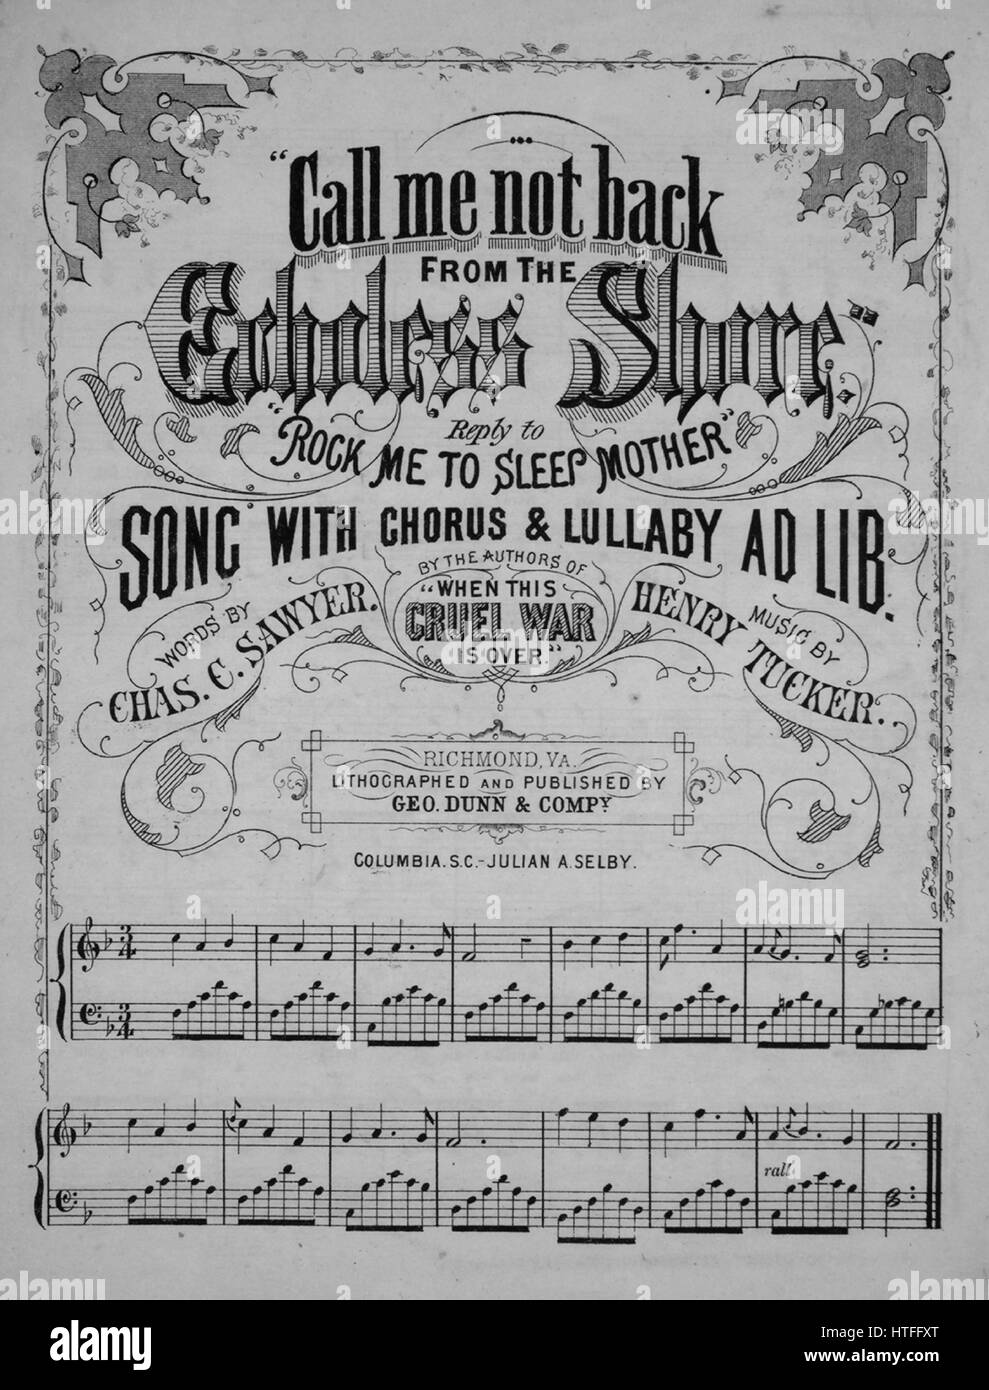 Sheet music cover image of the song 'Call Me Not Back from the Echoless Shore Reply to Rock Me to Sleep Mother Song With Chorus and Lullaby, Ad Lib', with original authorship notes reading 'Words by Chas C Sawyer Music by Henry Tucker', 1900. The publisher is listed as 'Lithographed and Published by Geo. Dunn and Compy.', the form of composition is 'strophic with chorus', the instrumentation is 'piano and voice', the first line reads 'Why is your forehead deep furrowed with care?', and the illustration artist is listed as 'None'. Stock Photo